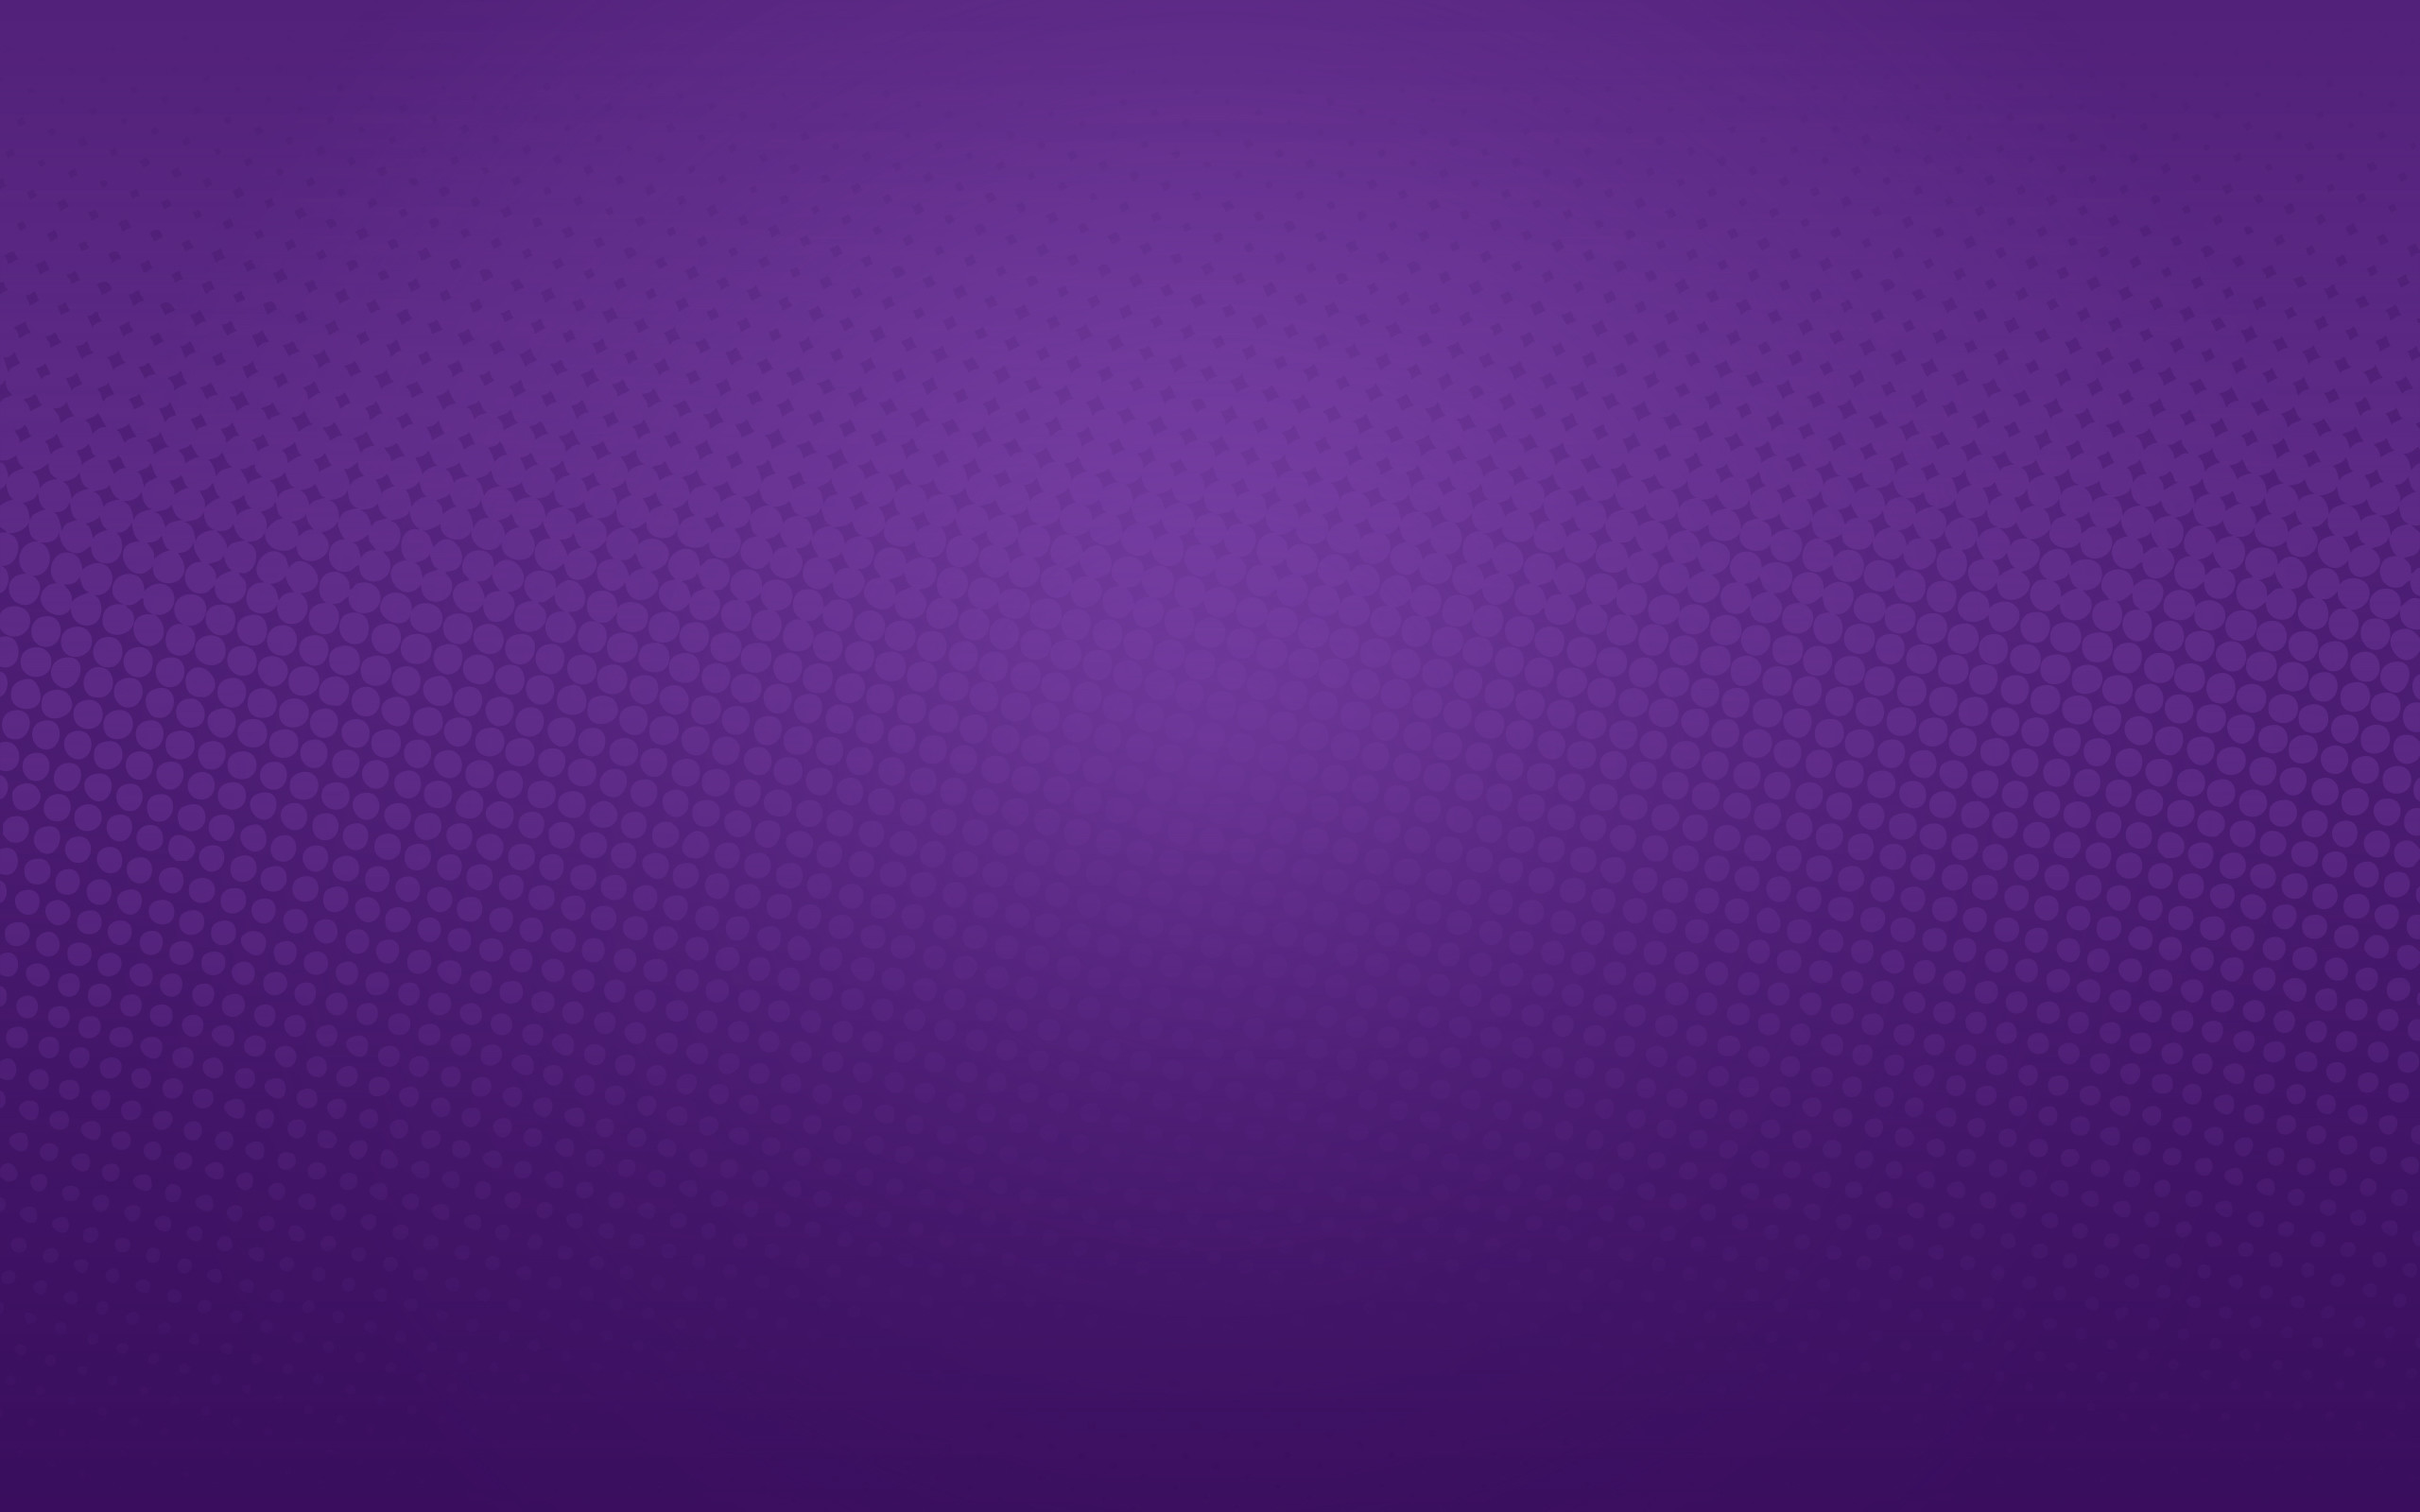 2560x1600 HD purple wallpaper image to use as background-11